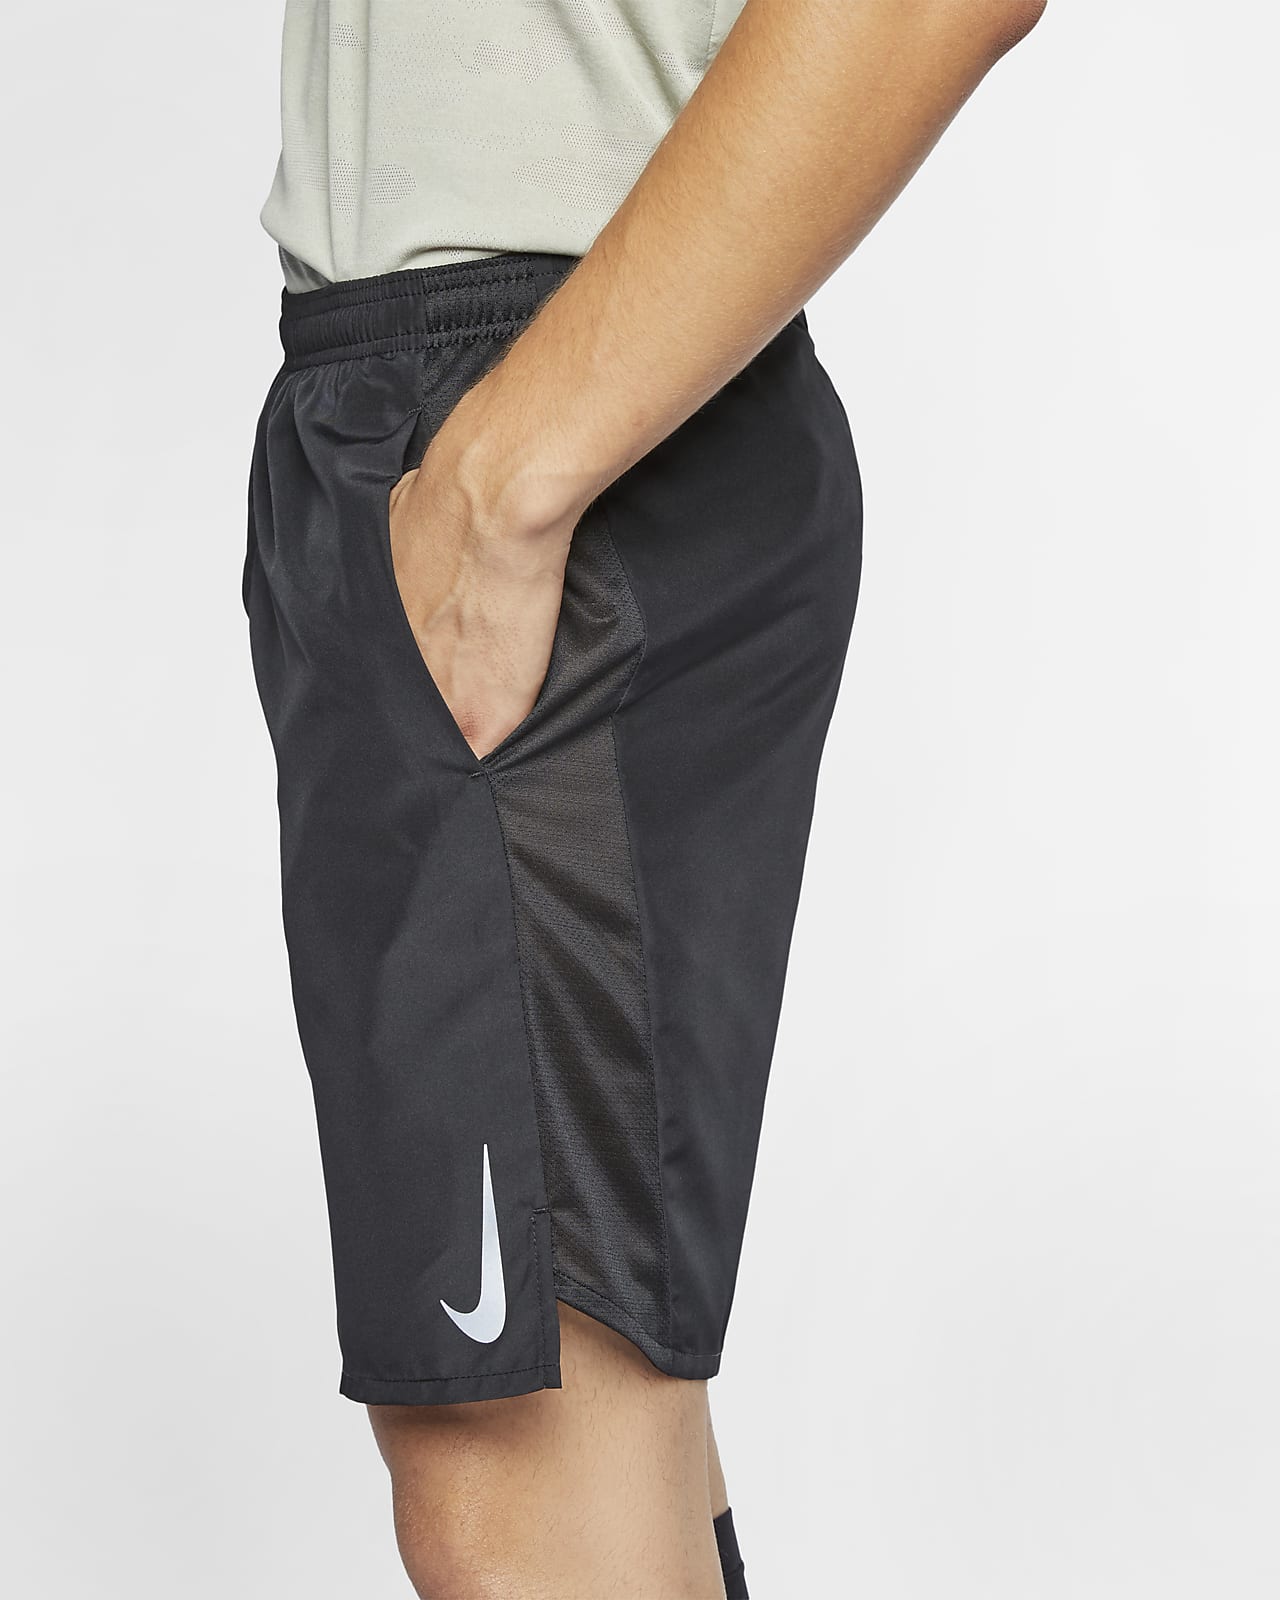 nike running ropa hombre